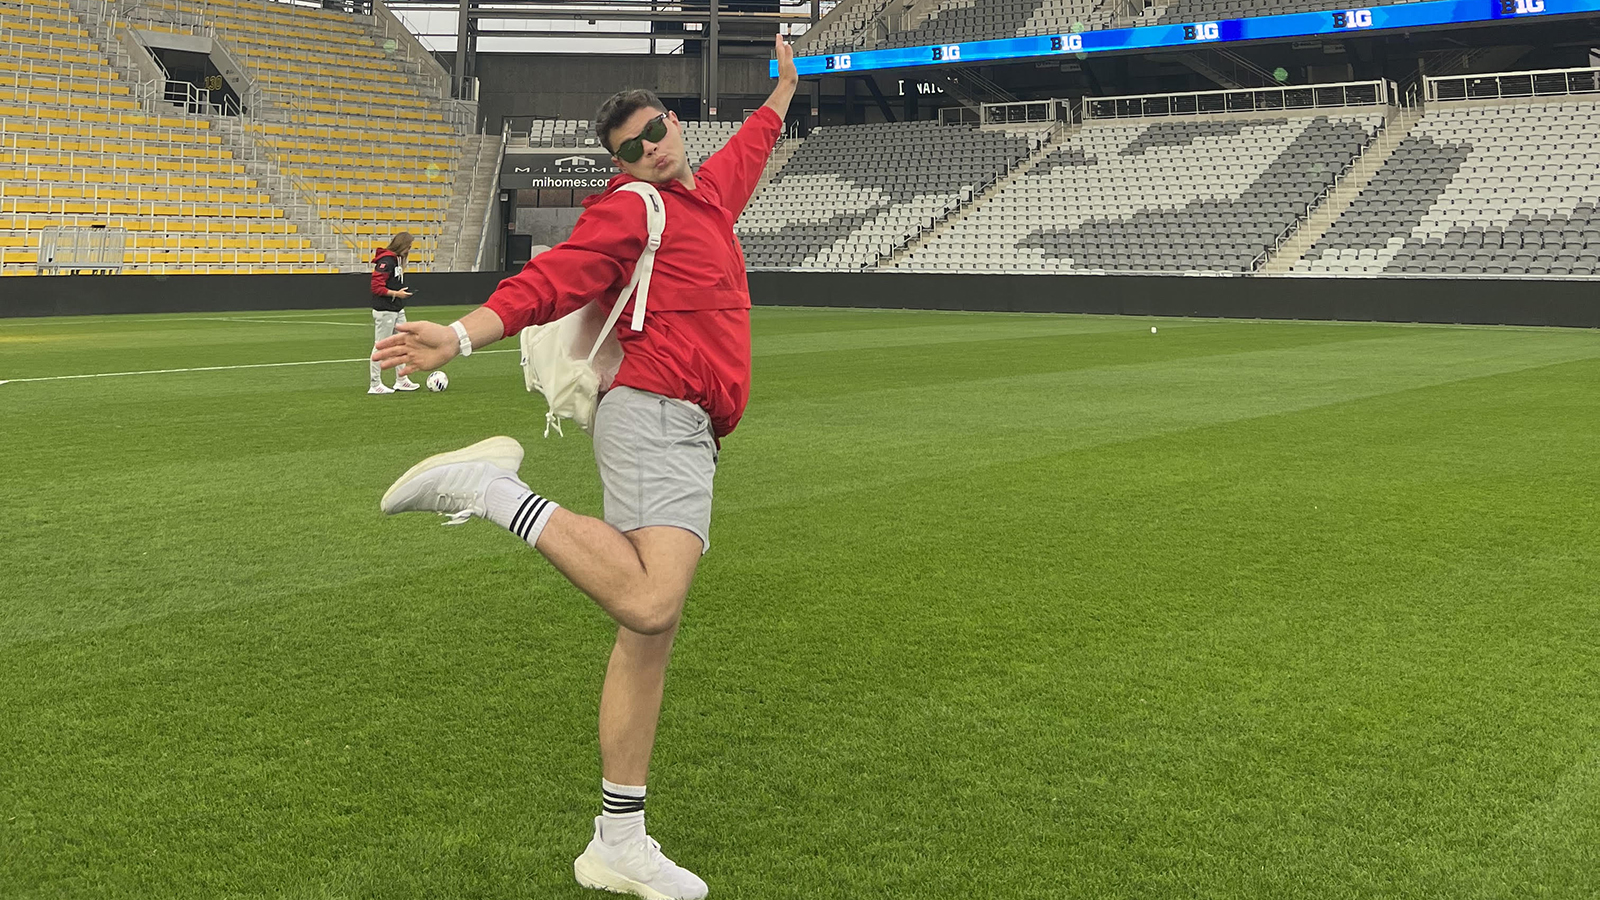 Peyton Nevil poses for a photo on the field at the 2022 Big Ten Women's Soccer Tournament